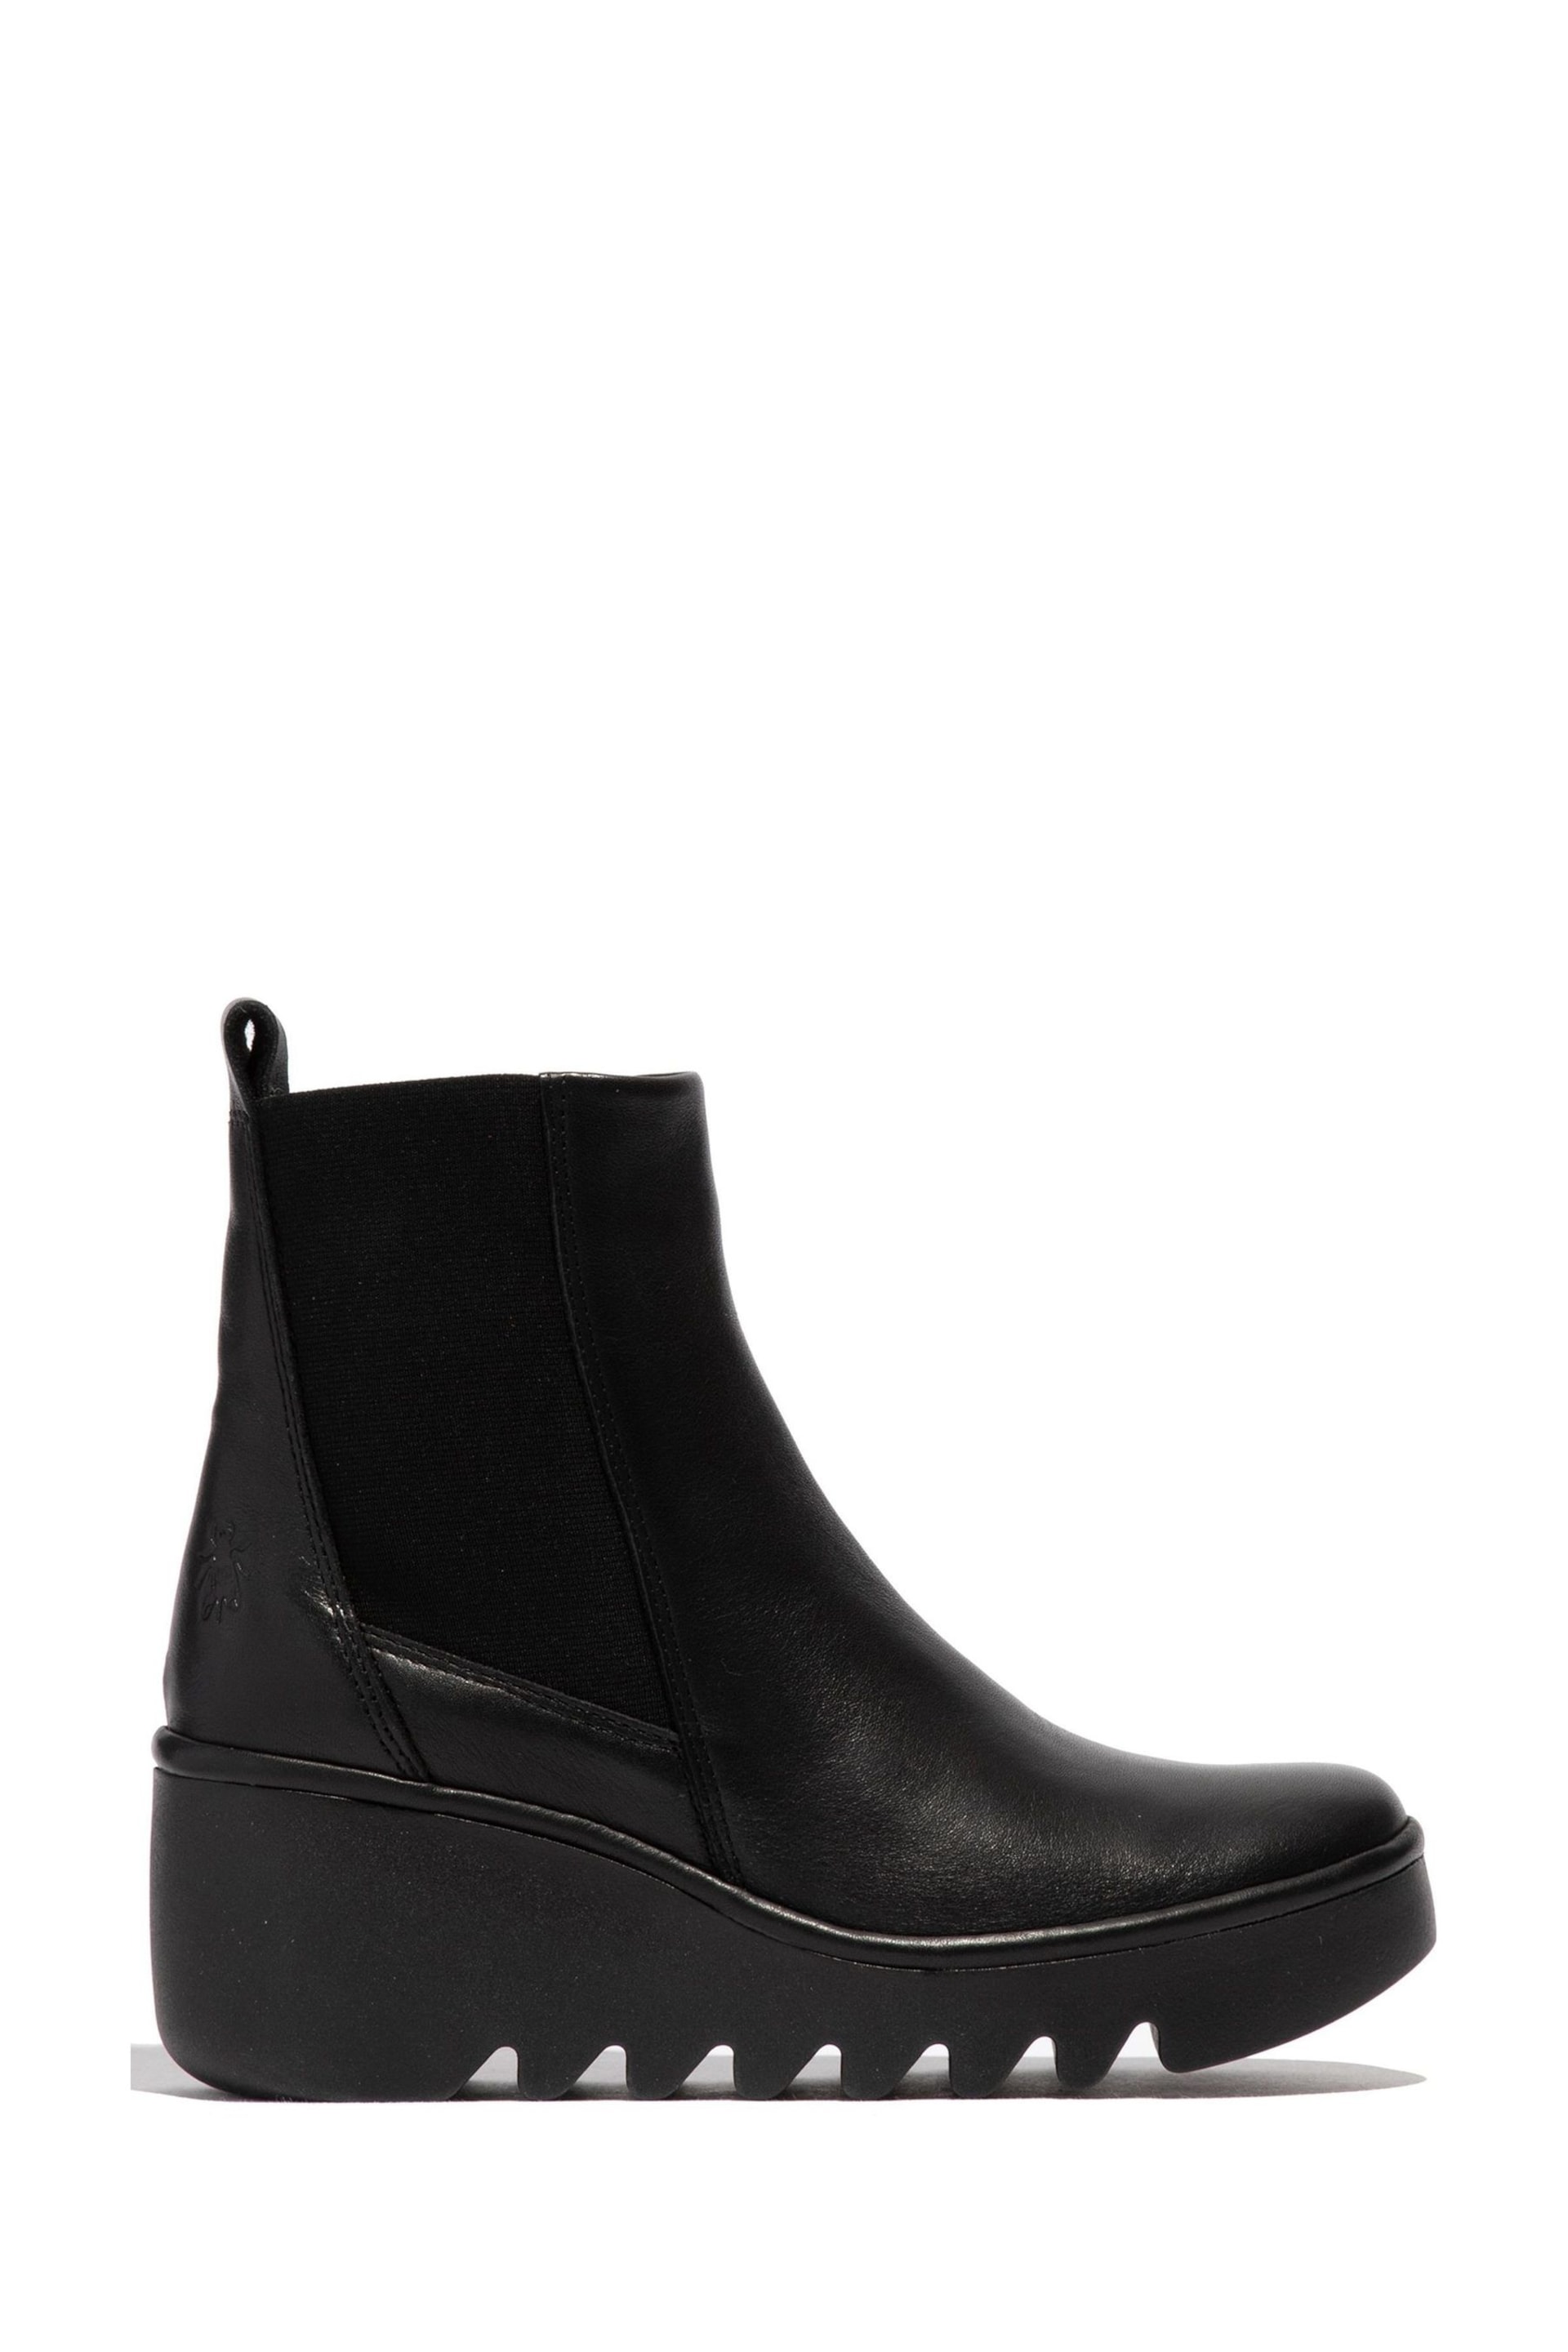 Fly London Bagu Black Wedge Boots - Image 1 of 4